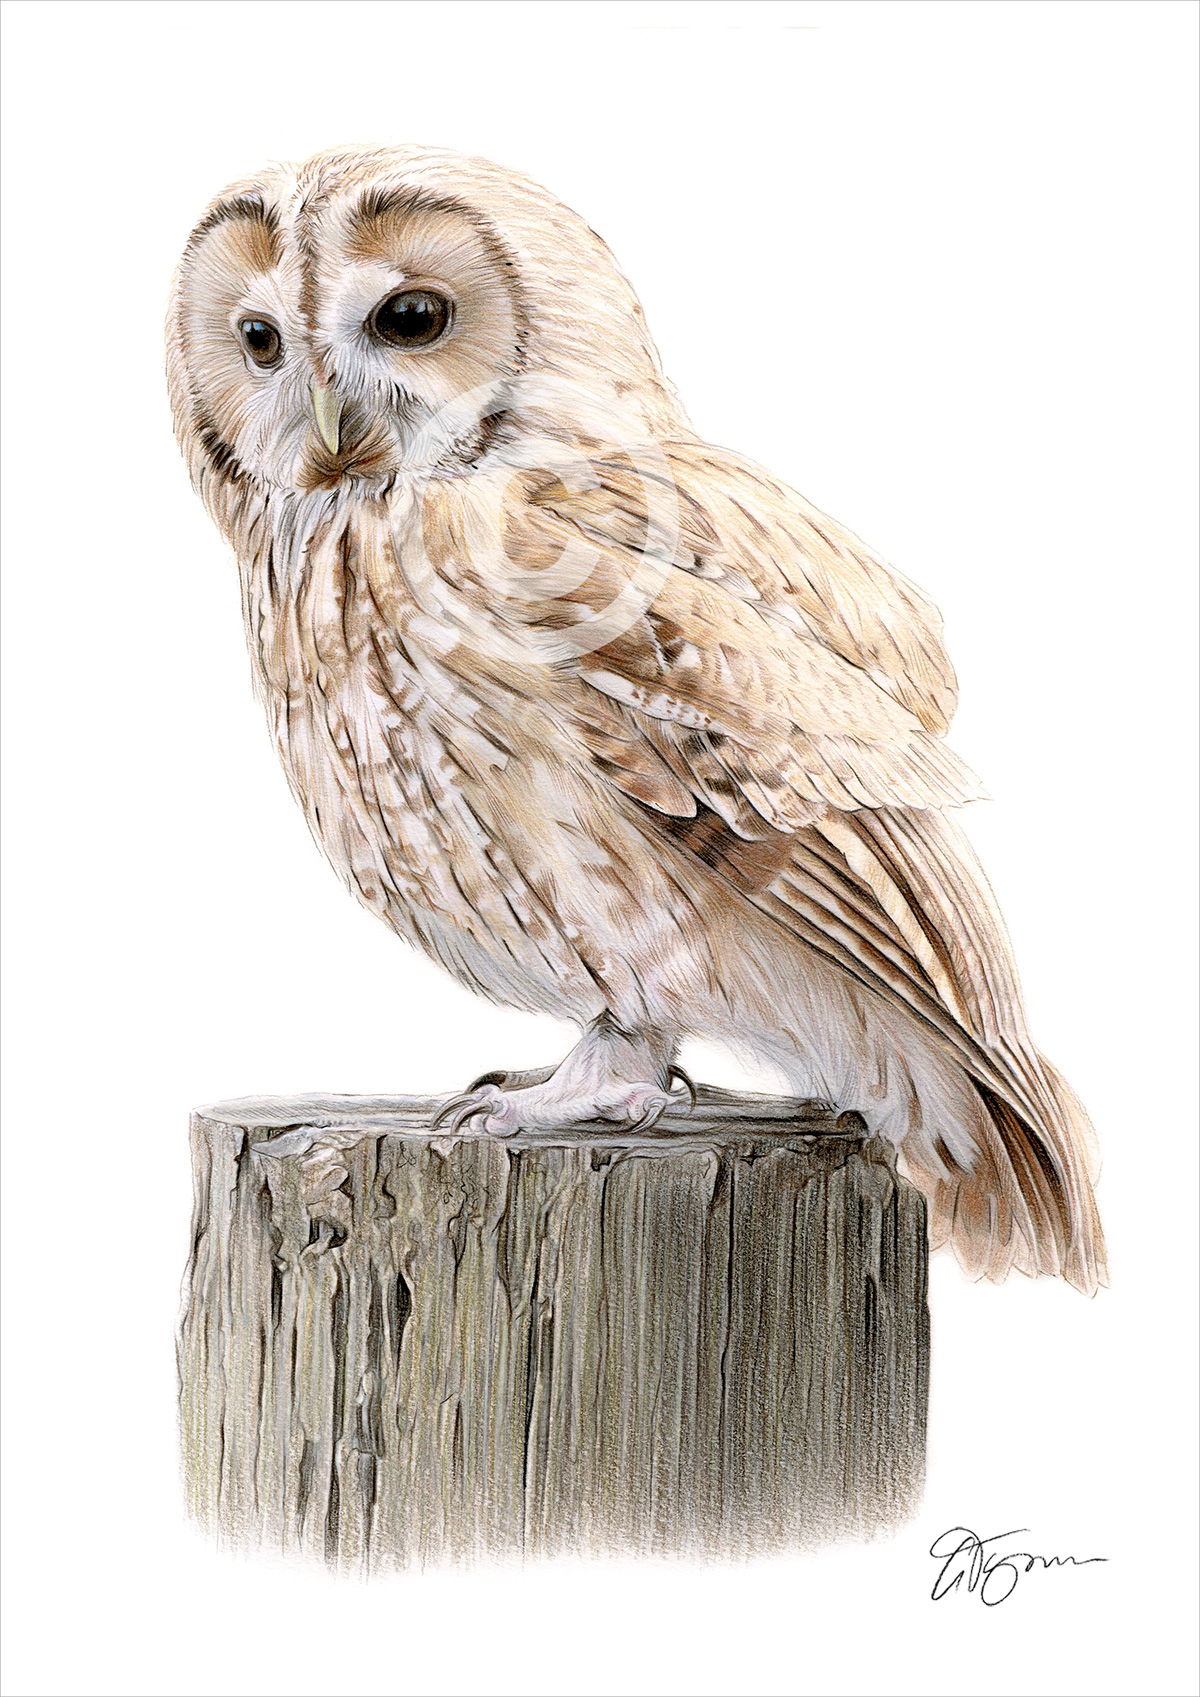 Colour pencil drawing of a tawny owl by artist Gary Tymon